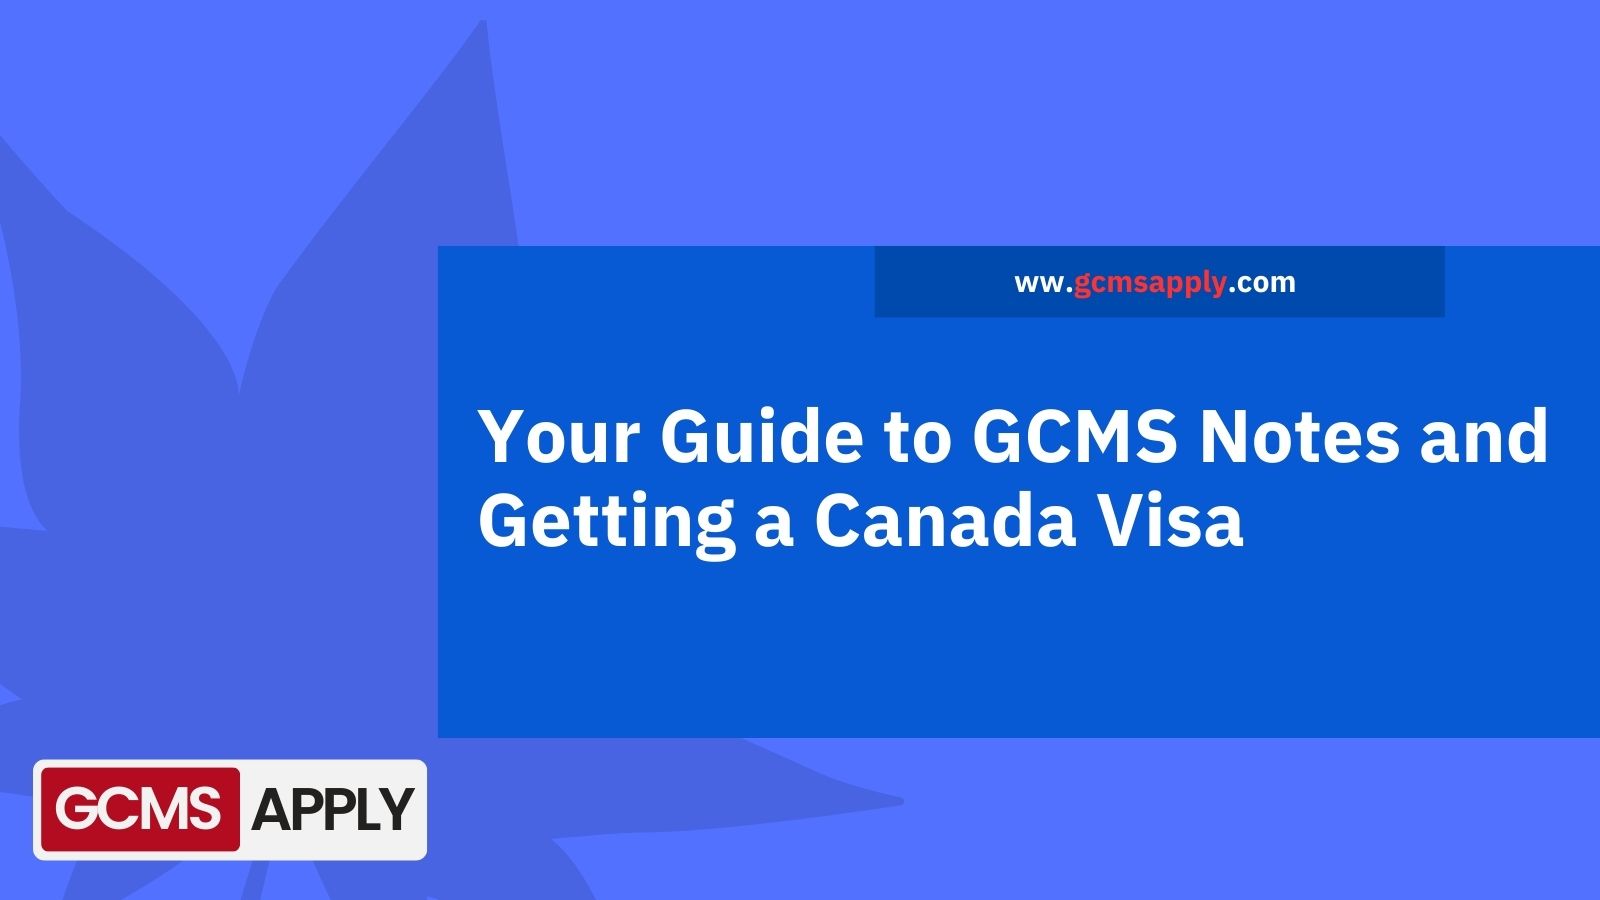 Guide to GCMS Notes: Get GCMS Notes